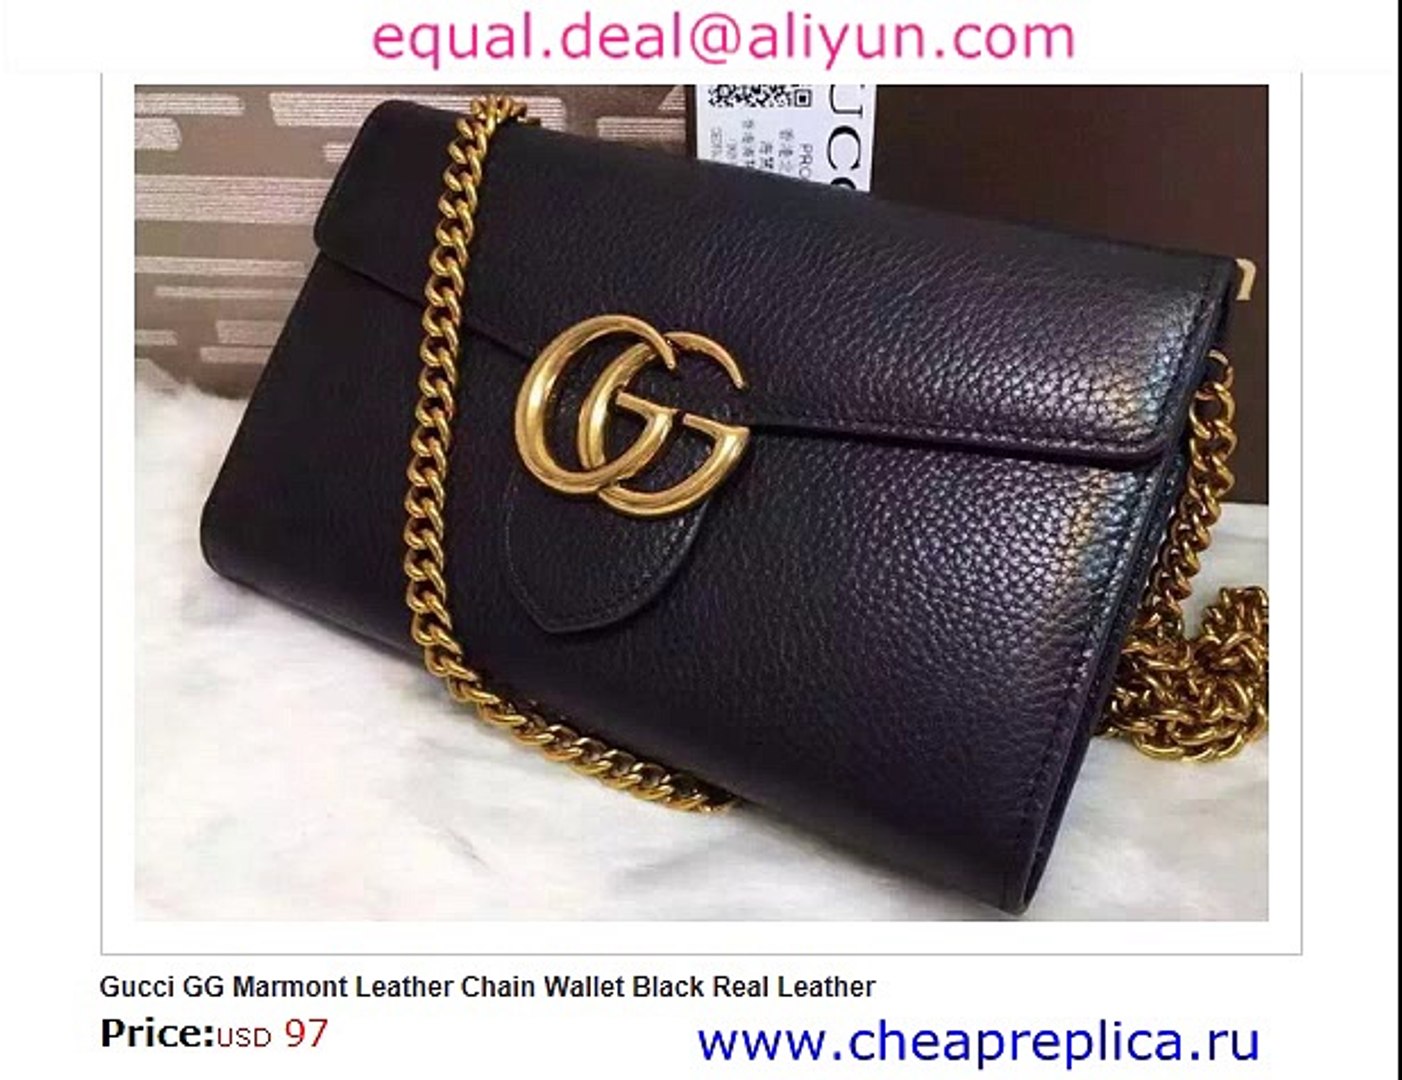 gucci gg marmont leather chain wallet